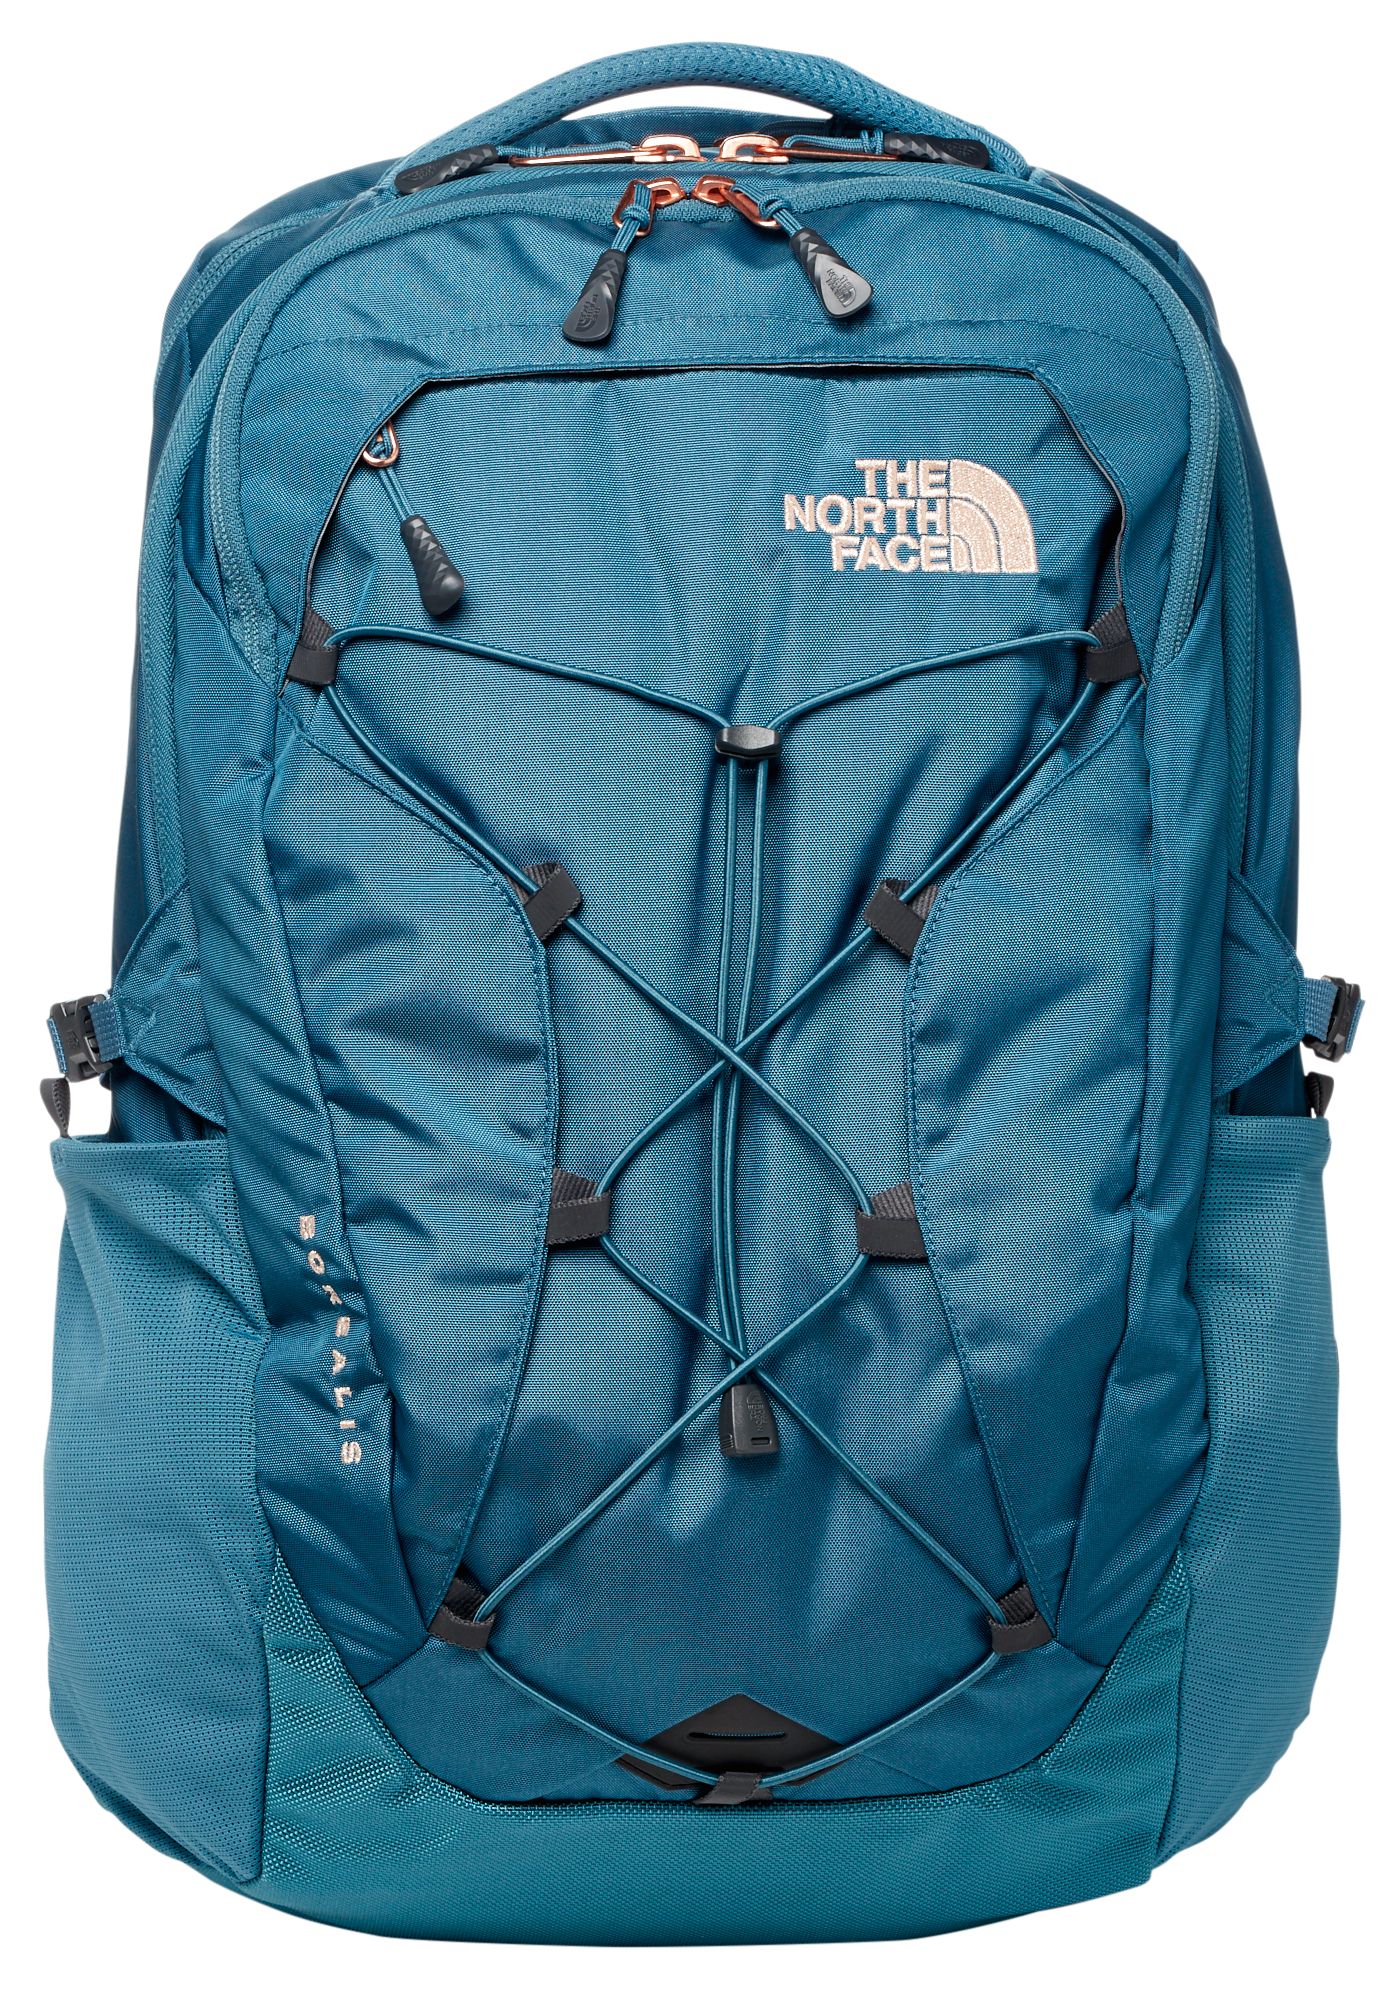 north face backpack gold zipper